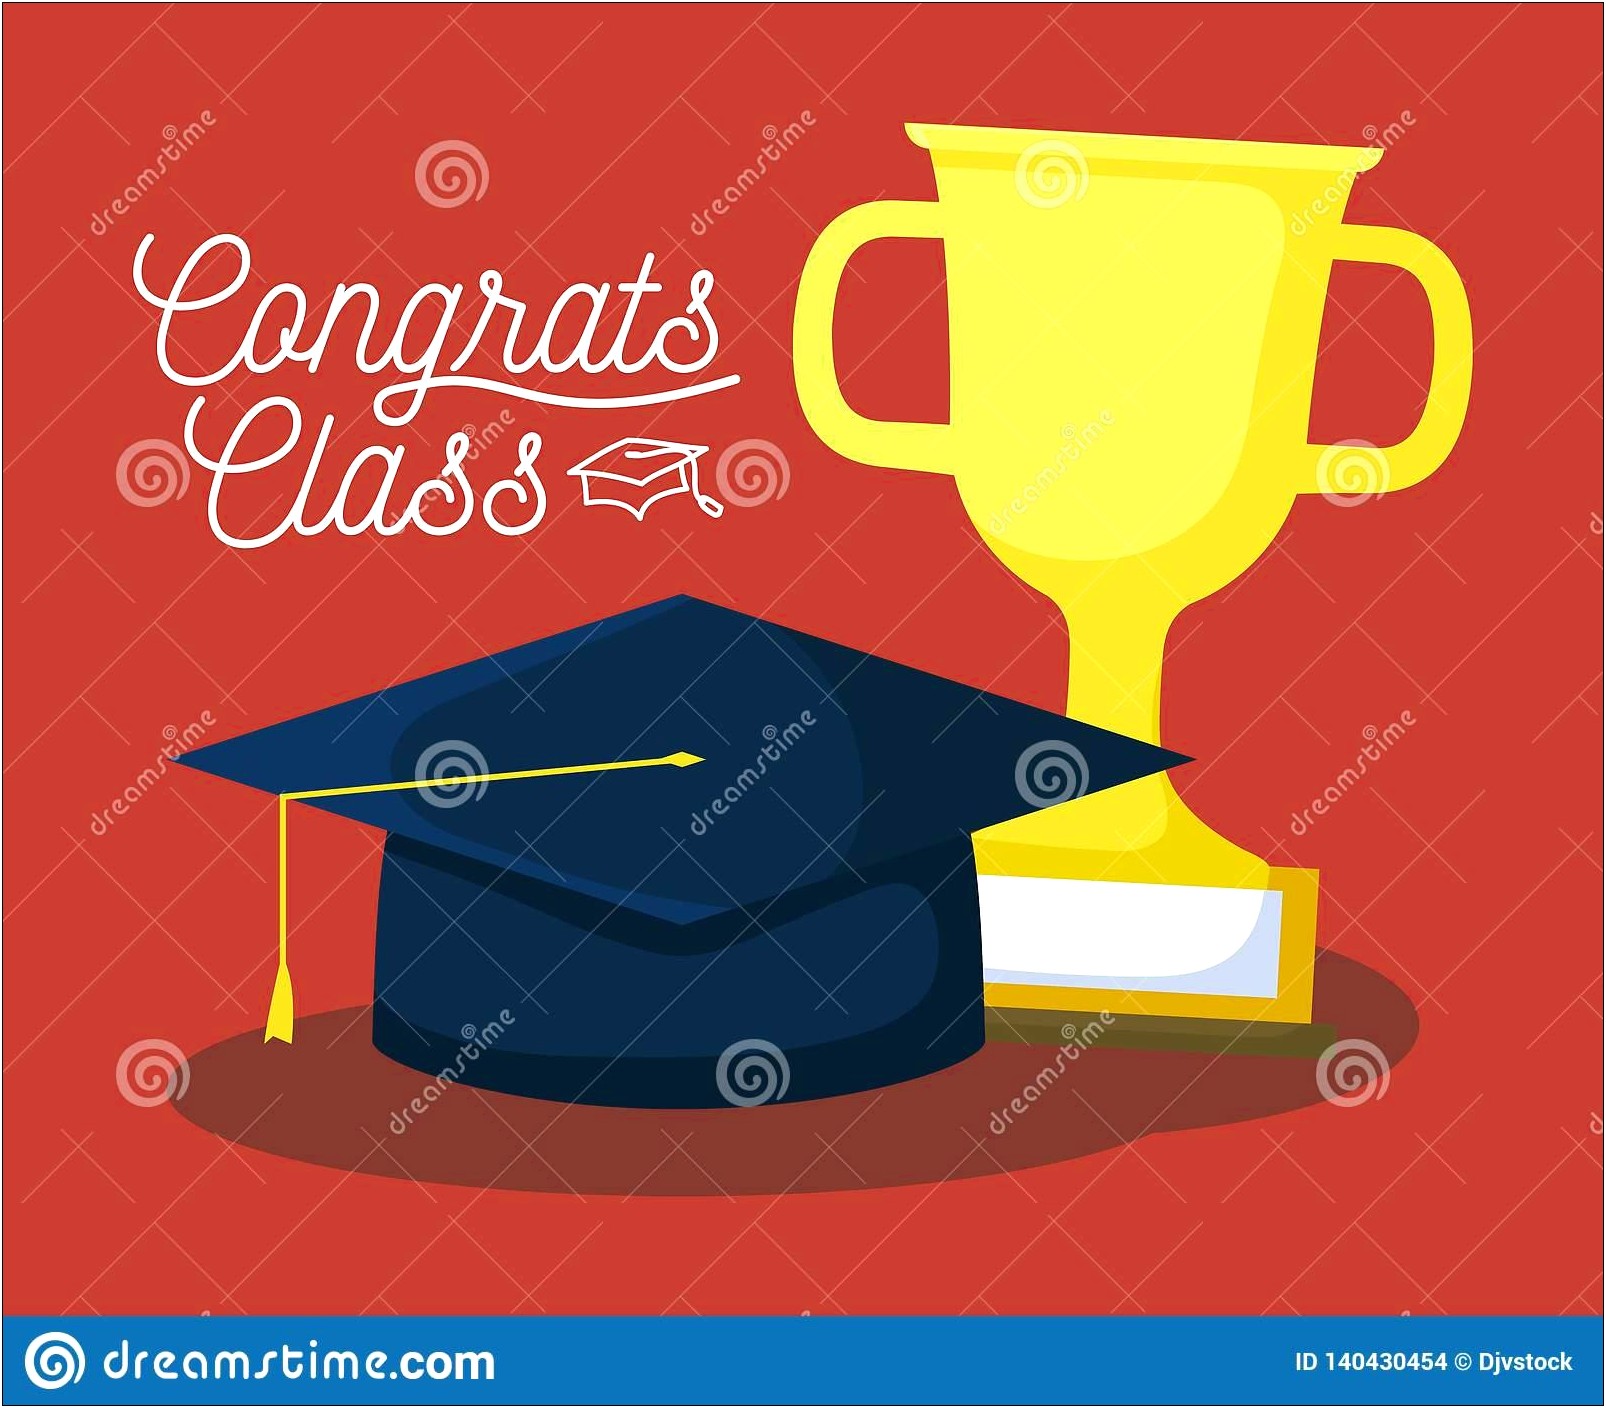 Graduation Card Template Vector Free Download